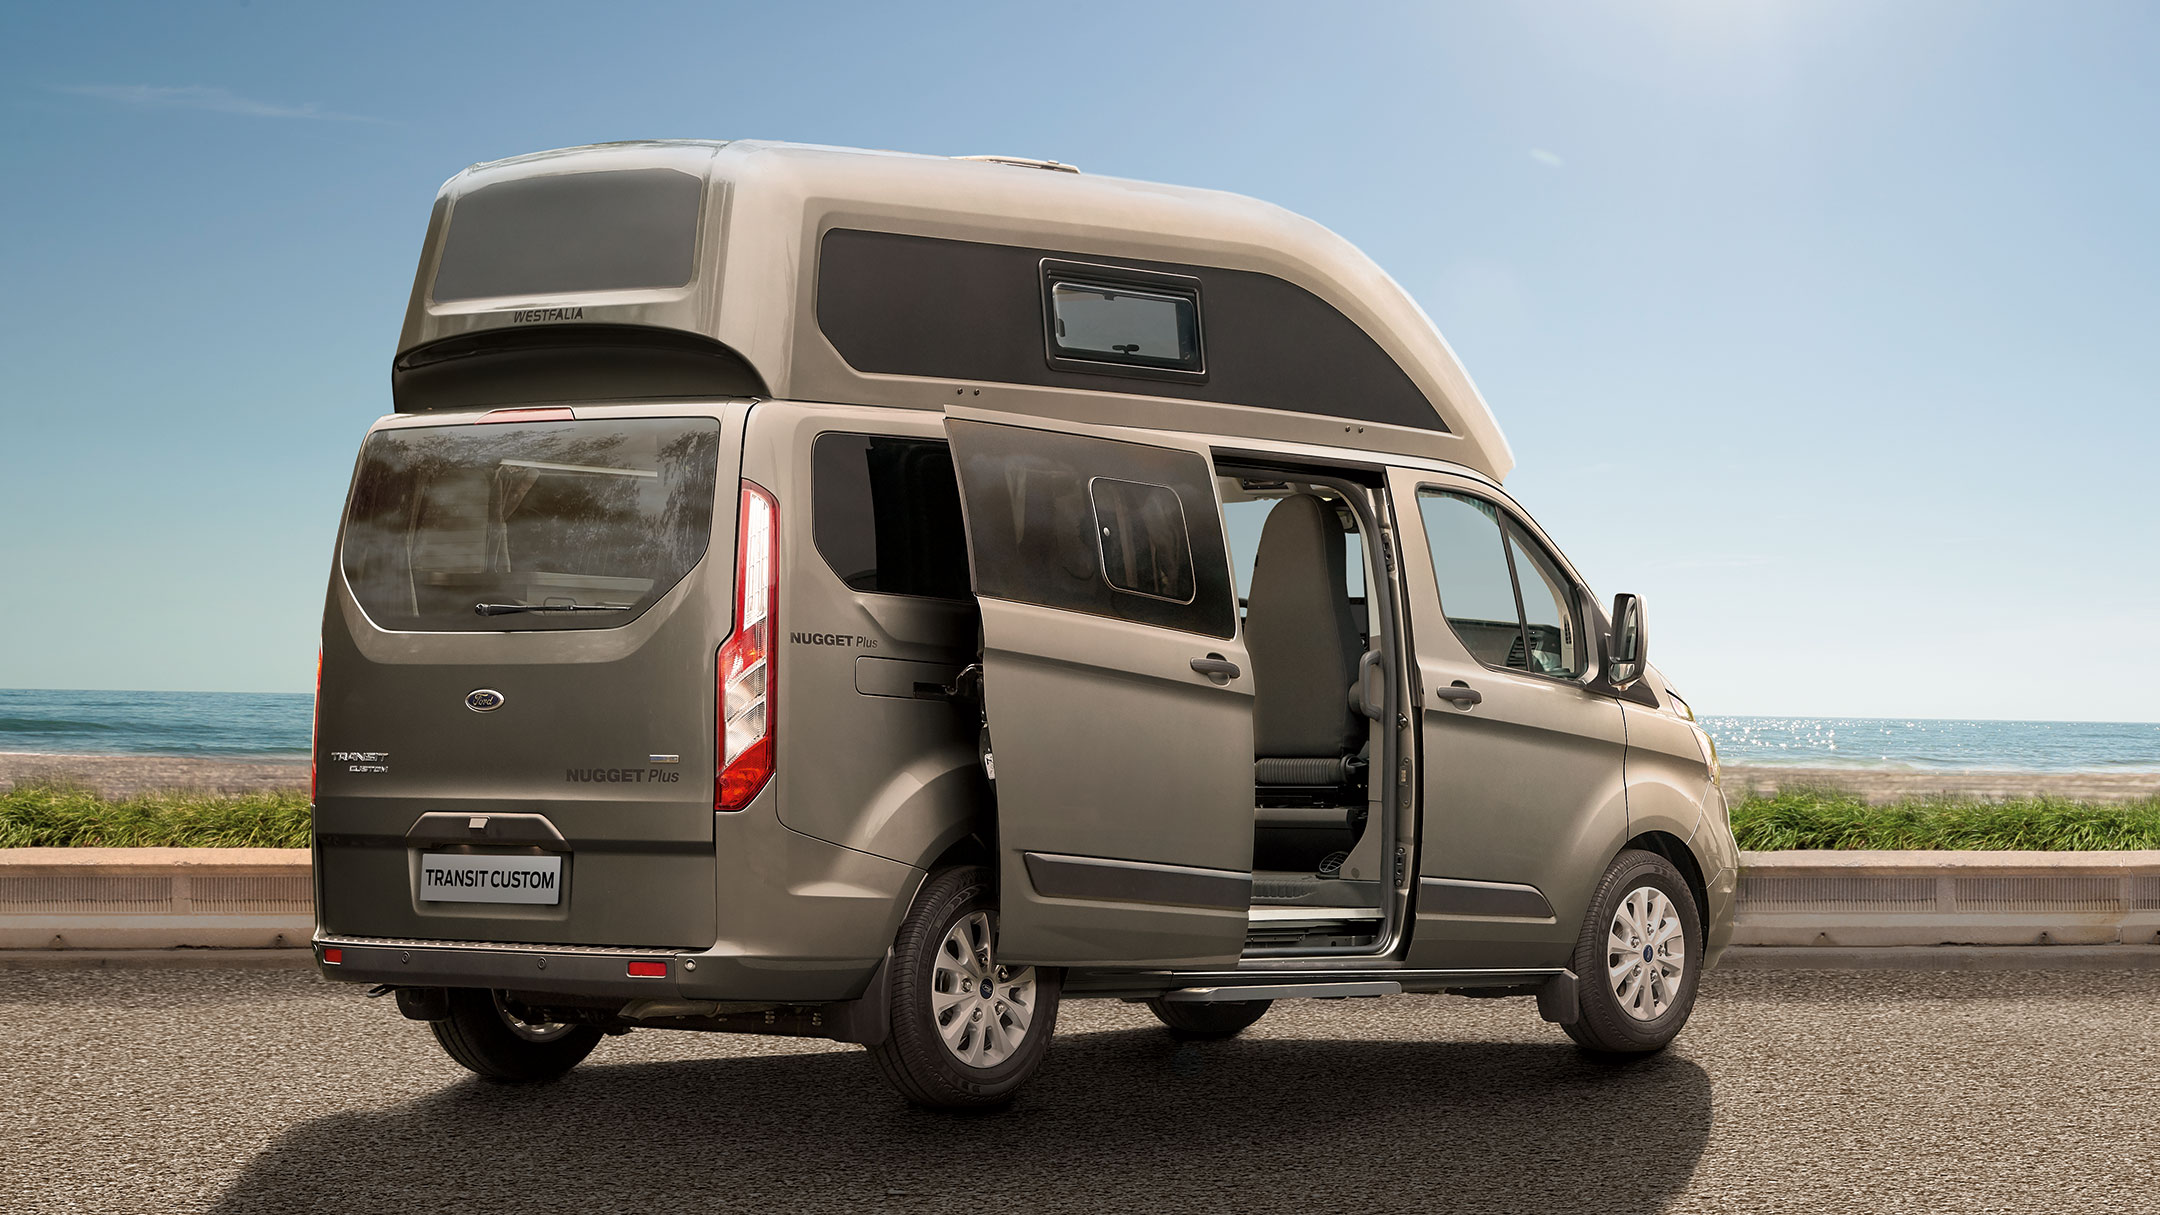 New Transit Custom Nugget Plus rear view with side doors open